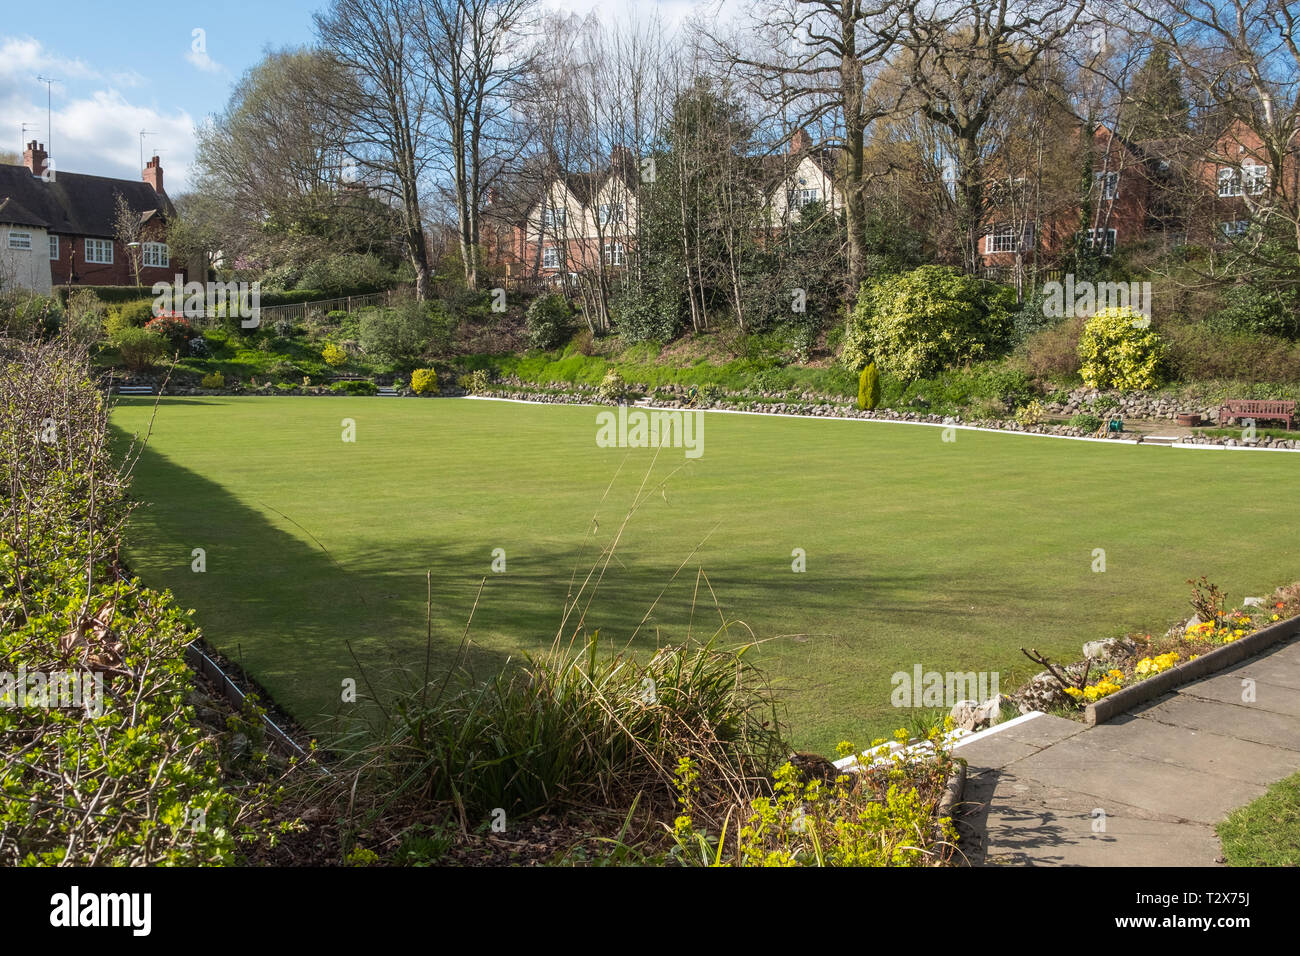 The green at Moor Pool Bowling Club on the Moor Pool Estate in Harborne, Birmingham Stock Photo